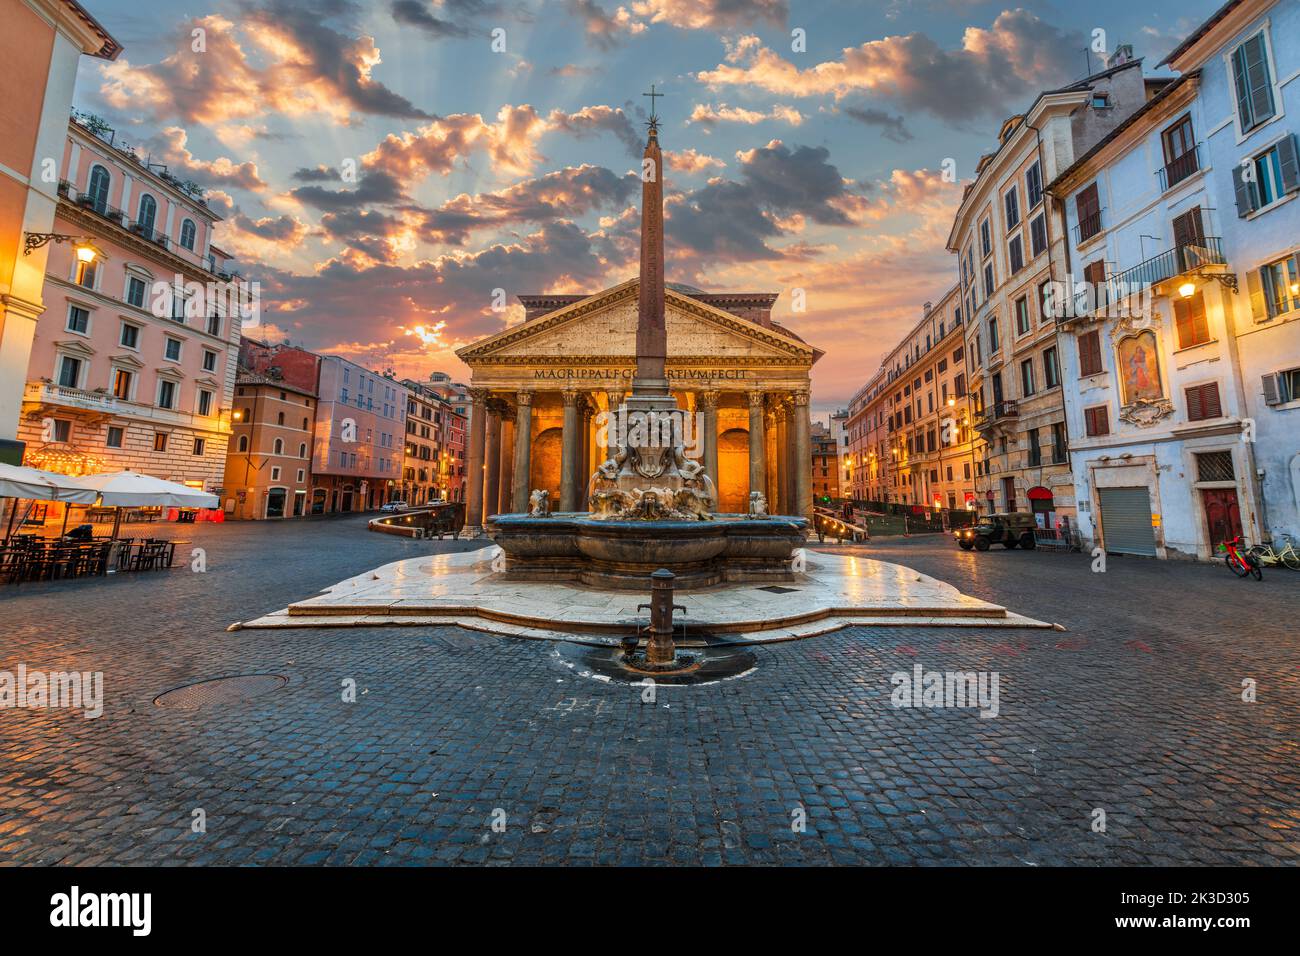 Rome, Italy at The Pantheon, an ancient Roman Temple dating from the 2nd century. Stock Photo